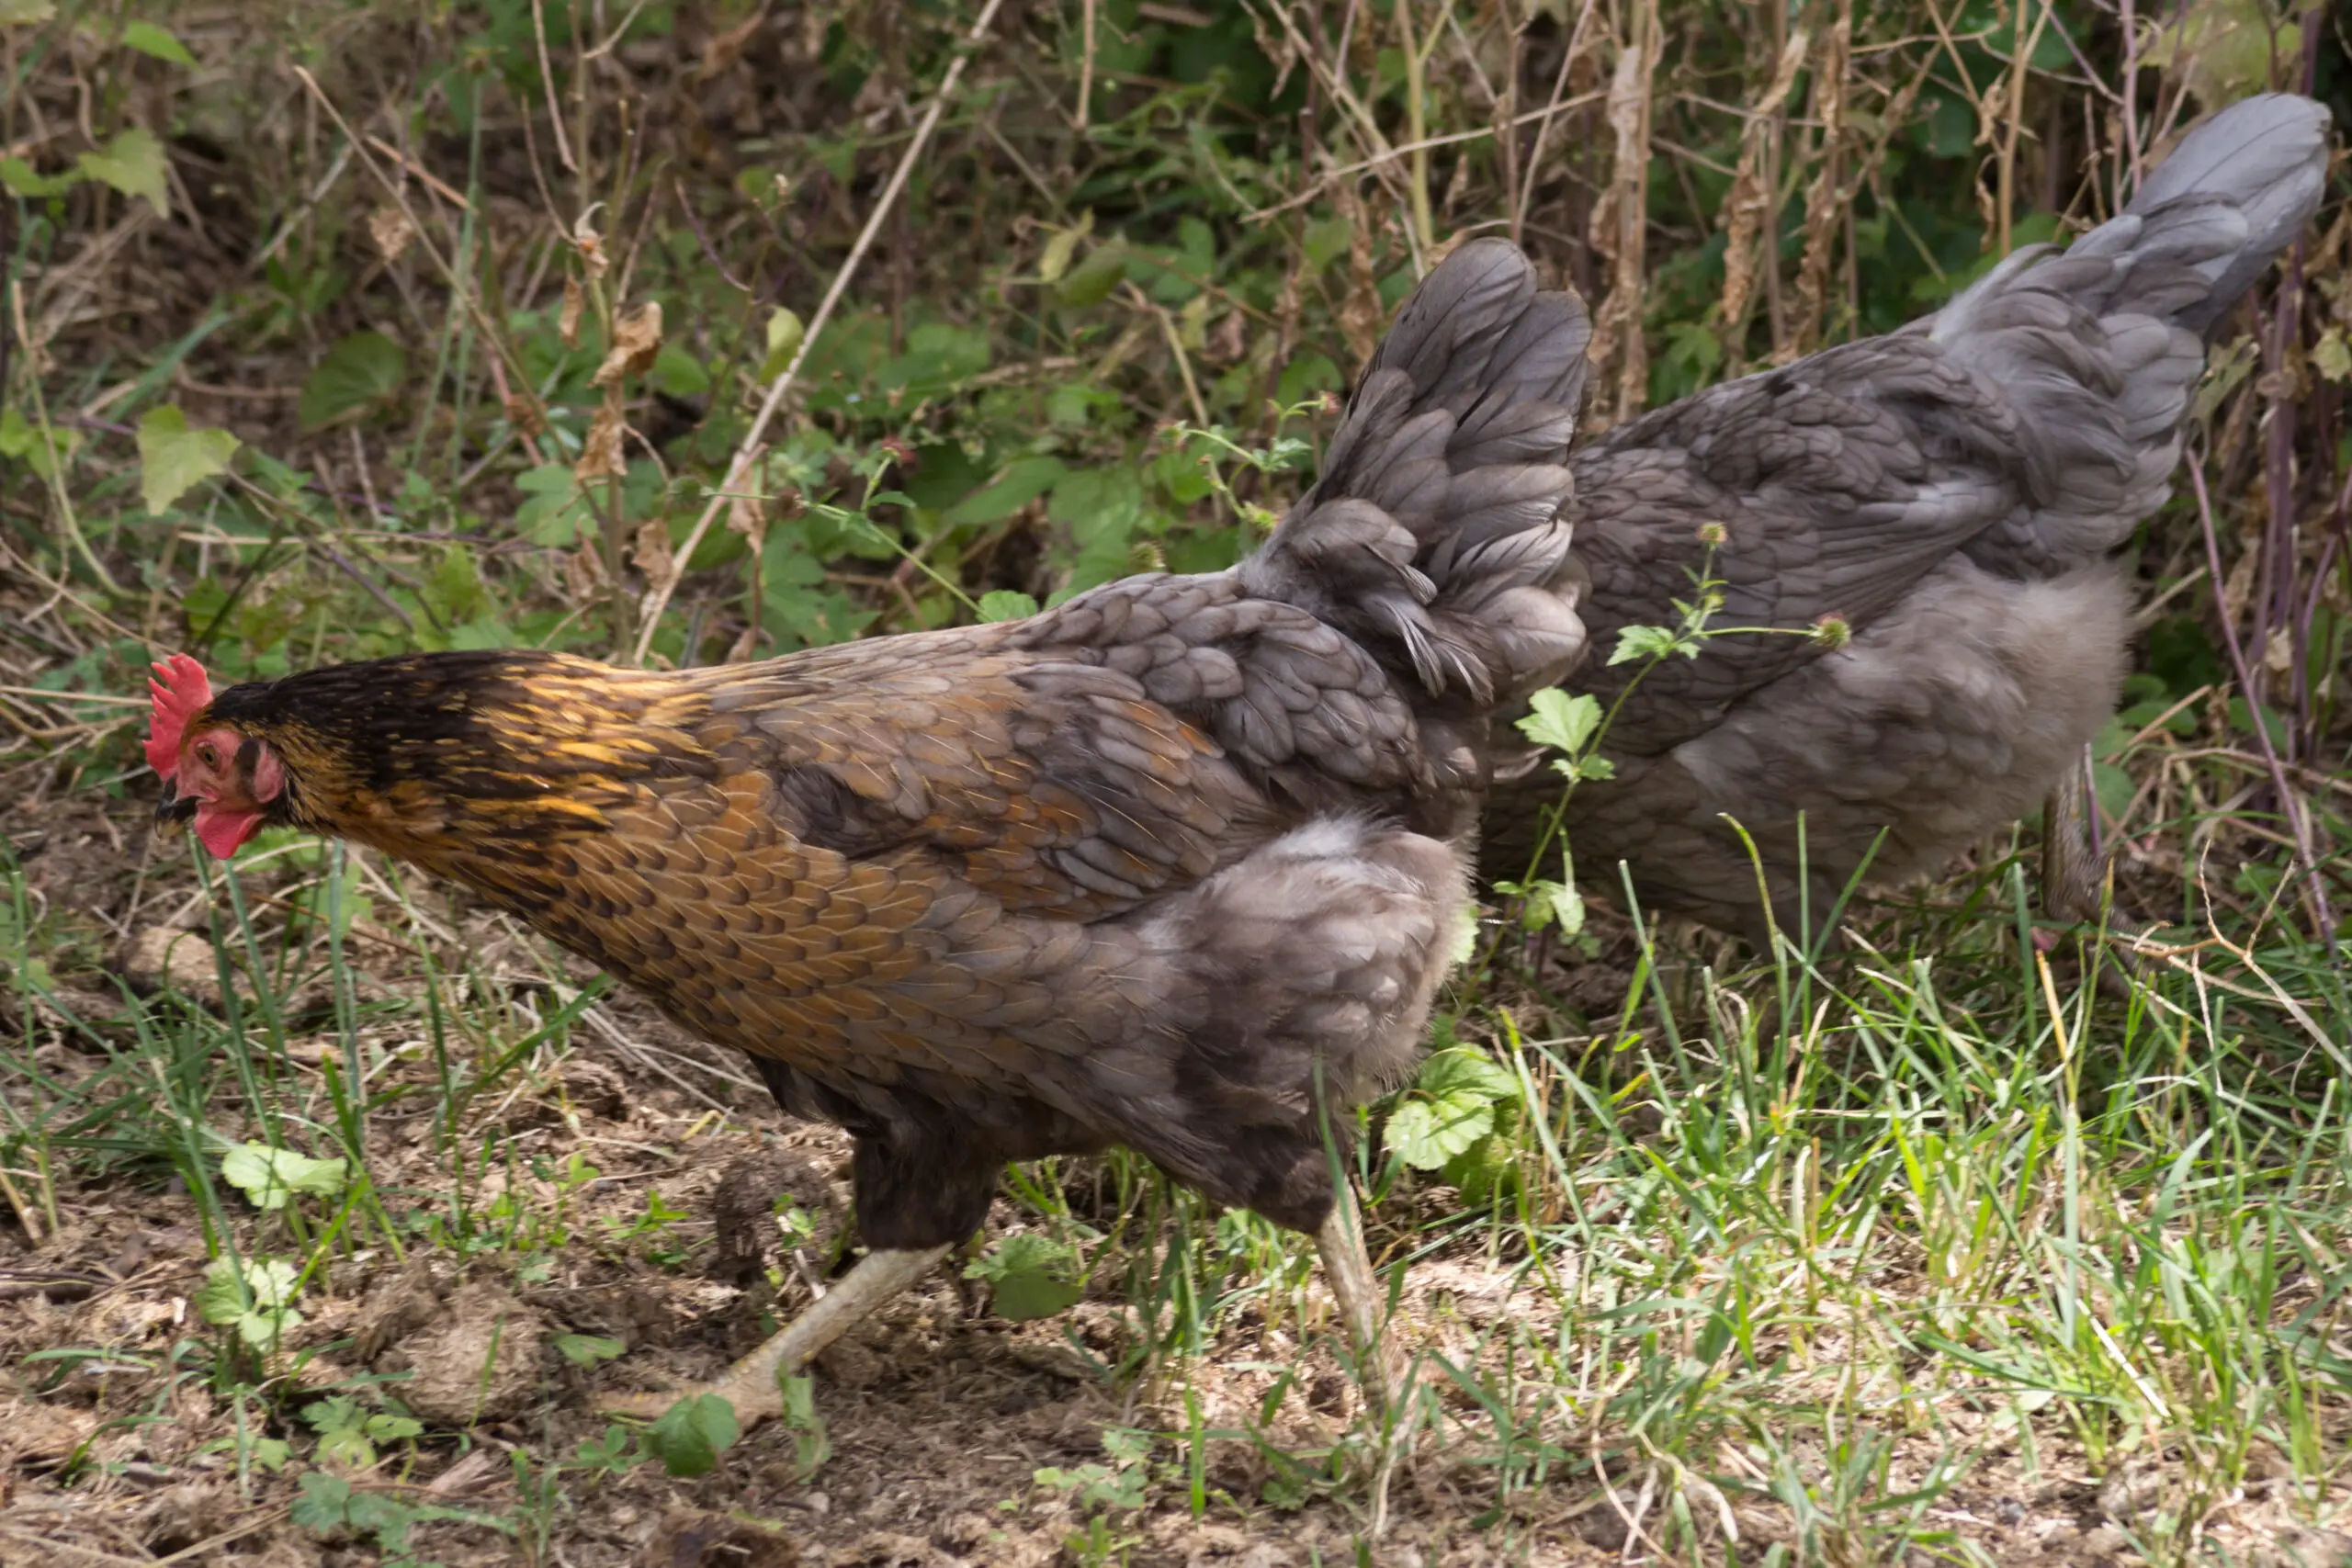 on a very sunny day in may in south germany you see chickens male and female in black and brown and grey color running around in green grass and behind bushes